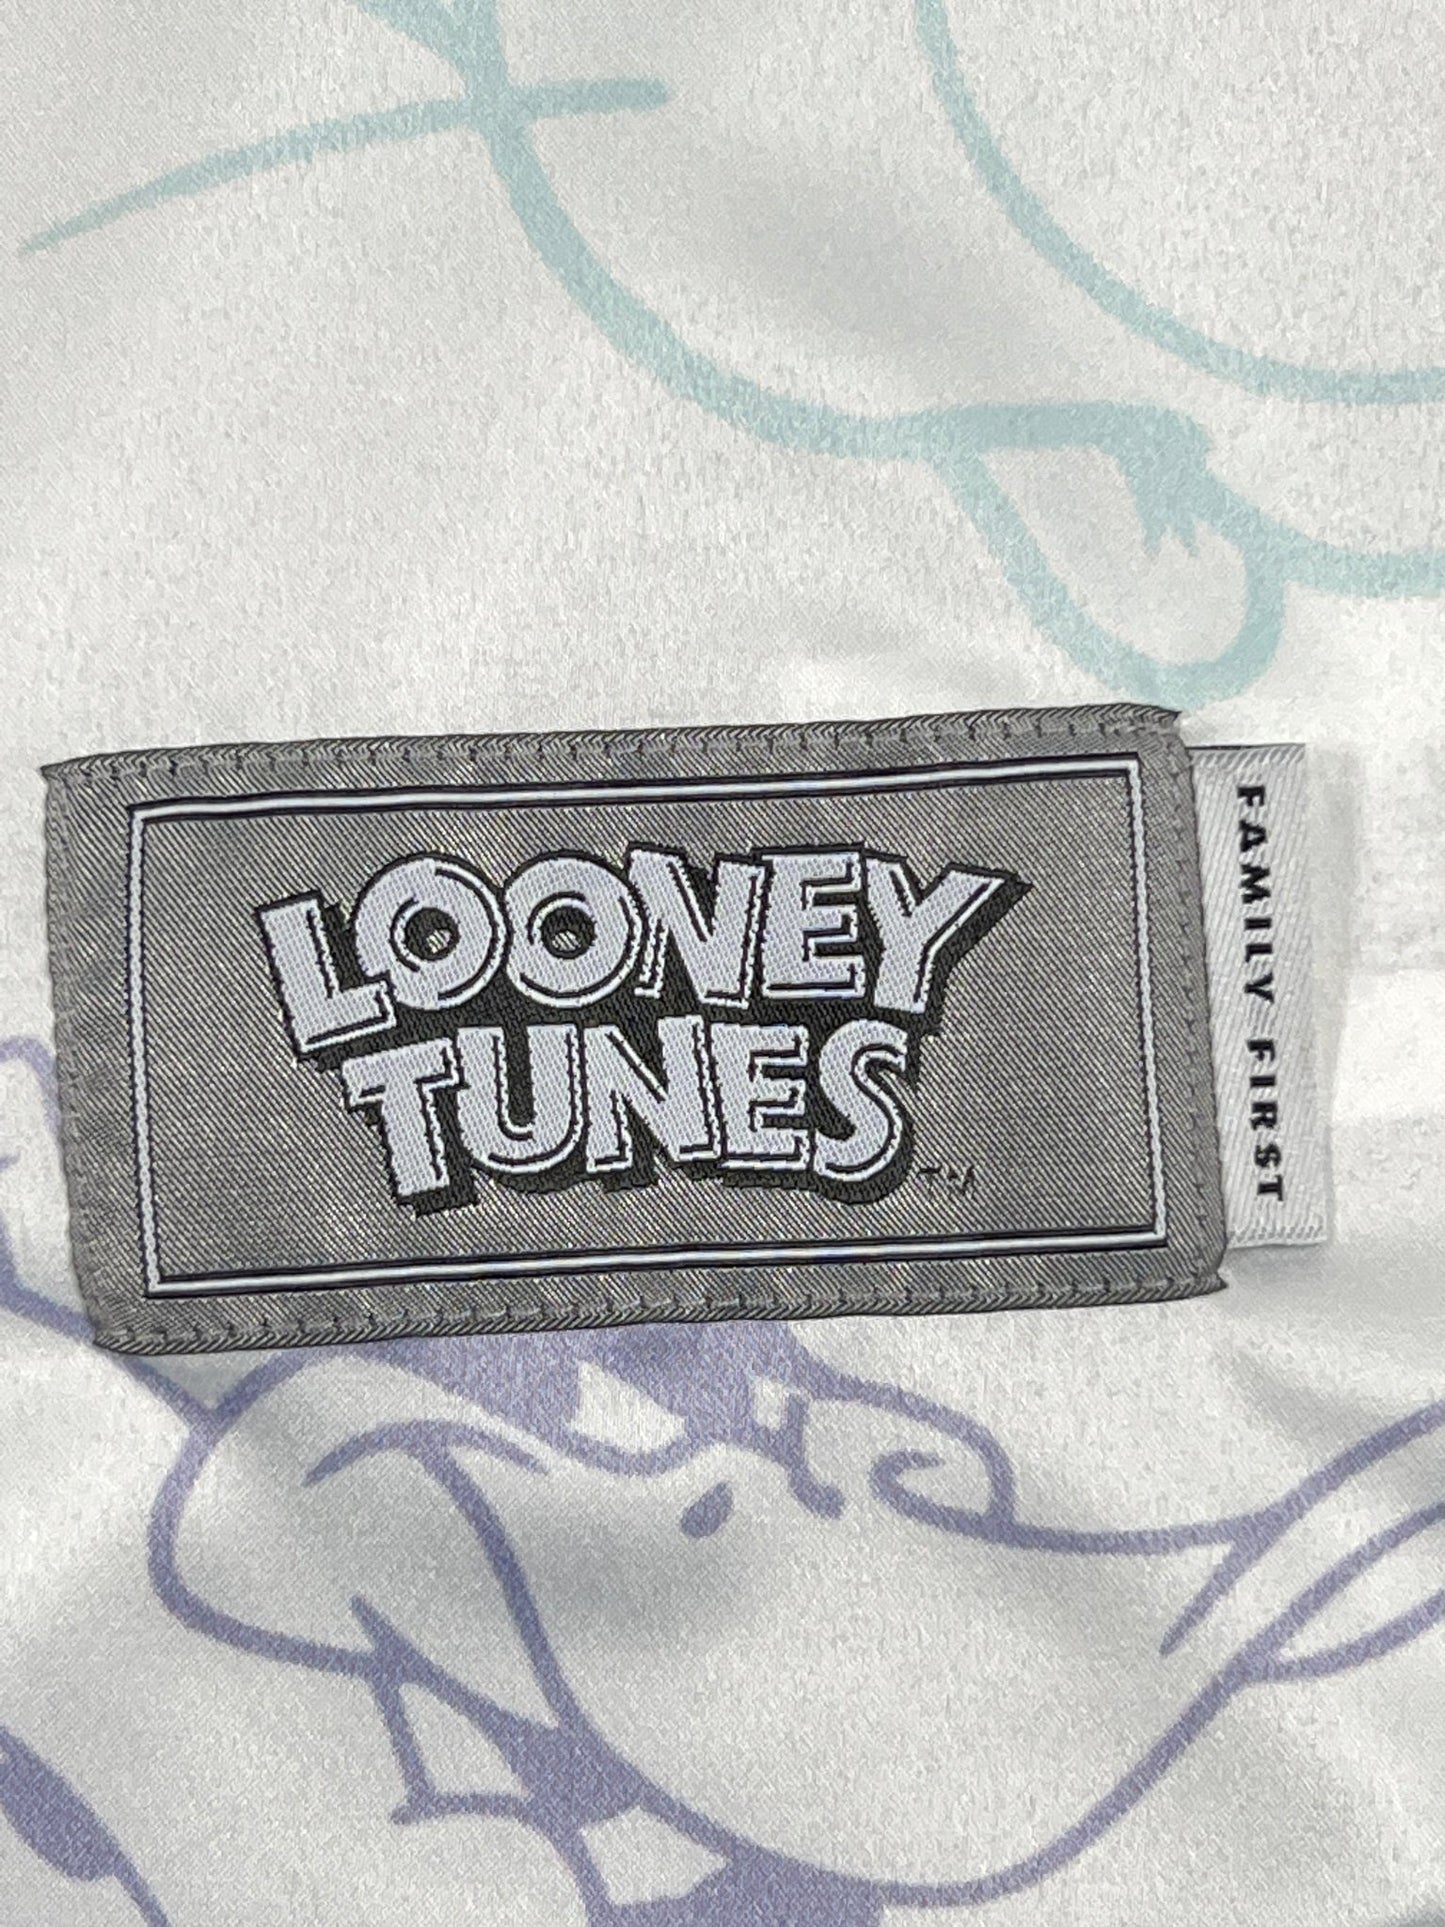 A FAMILY FIRST SHS2321 shirt in white with a label that says Looney Tunes.